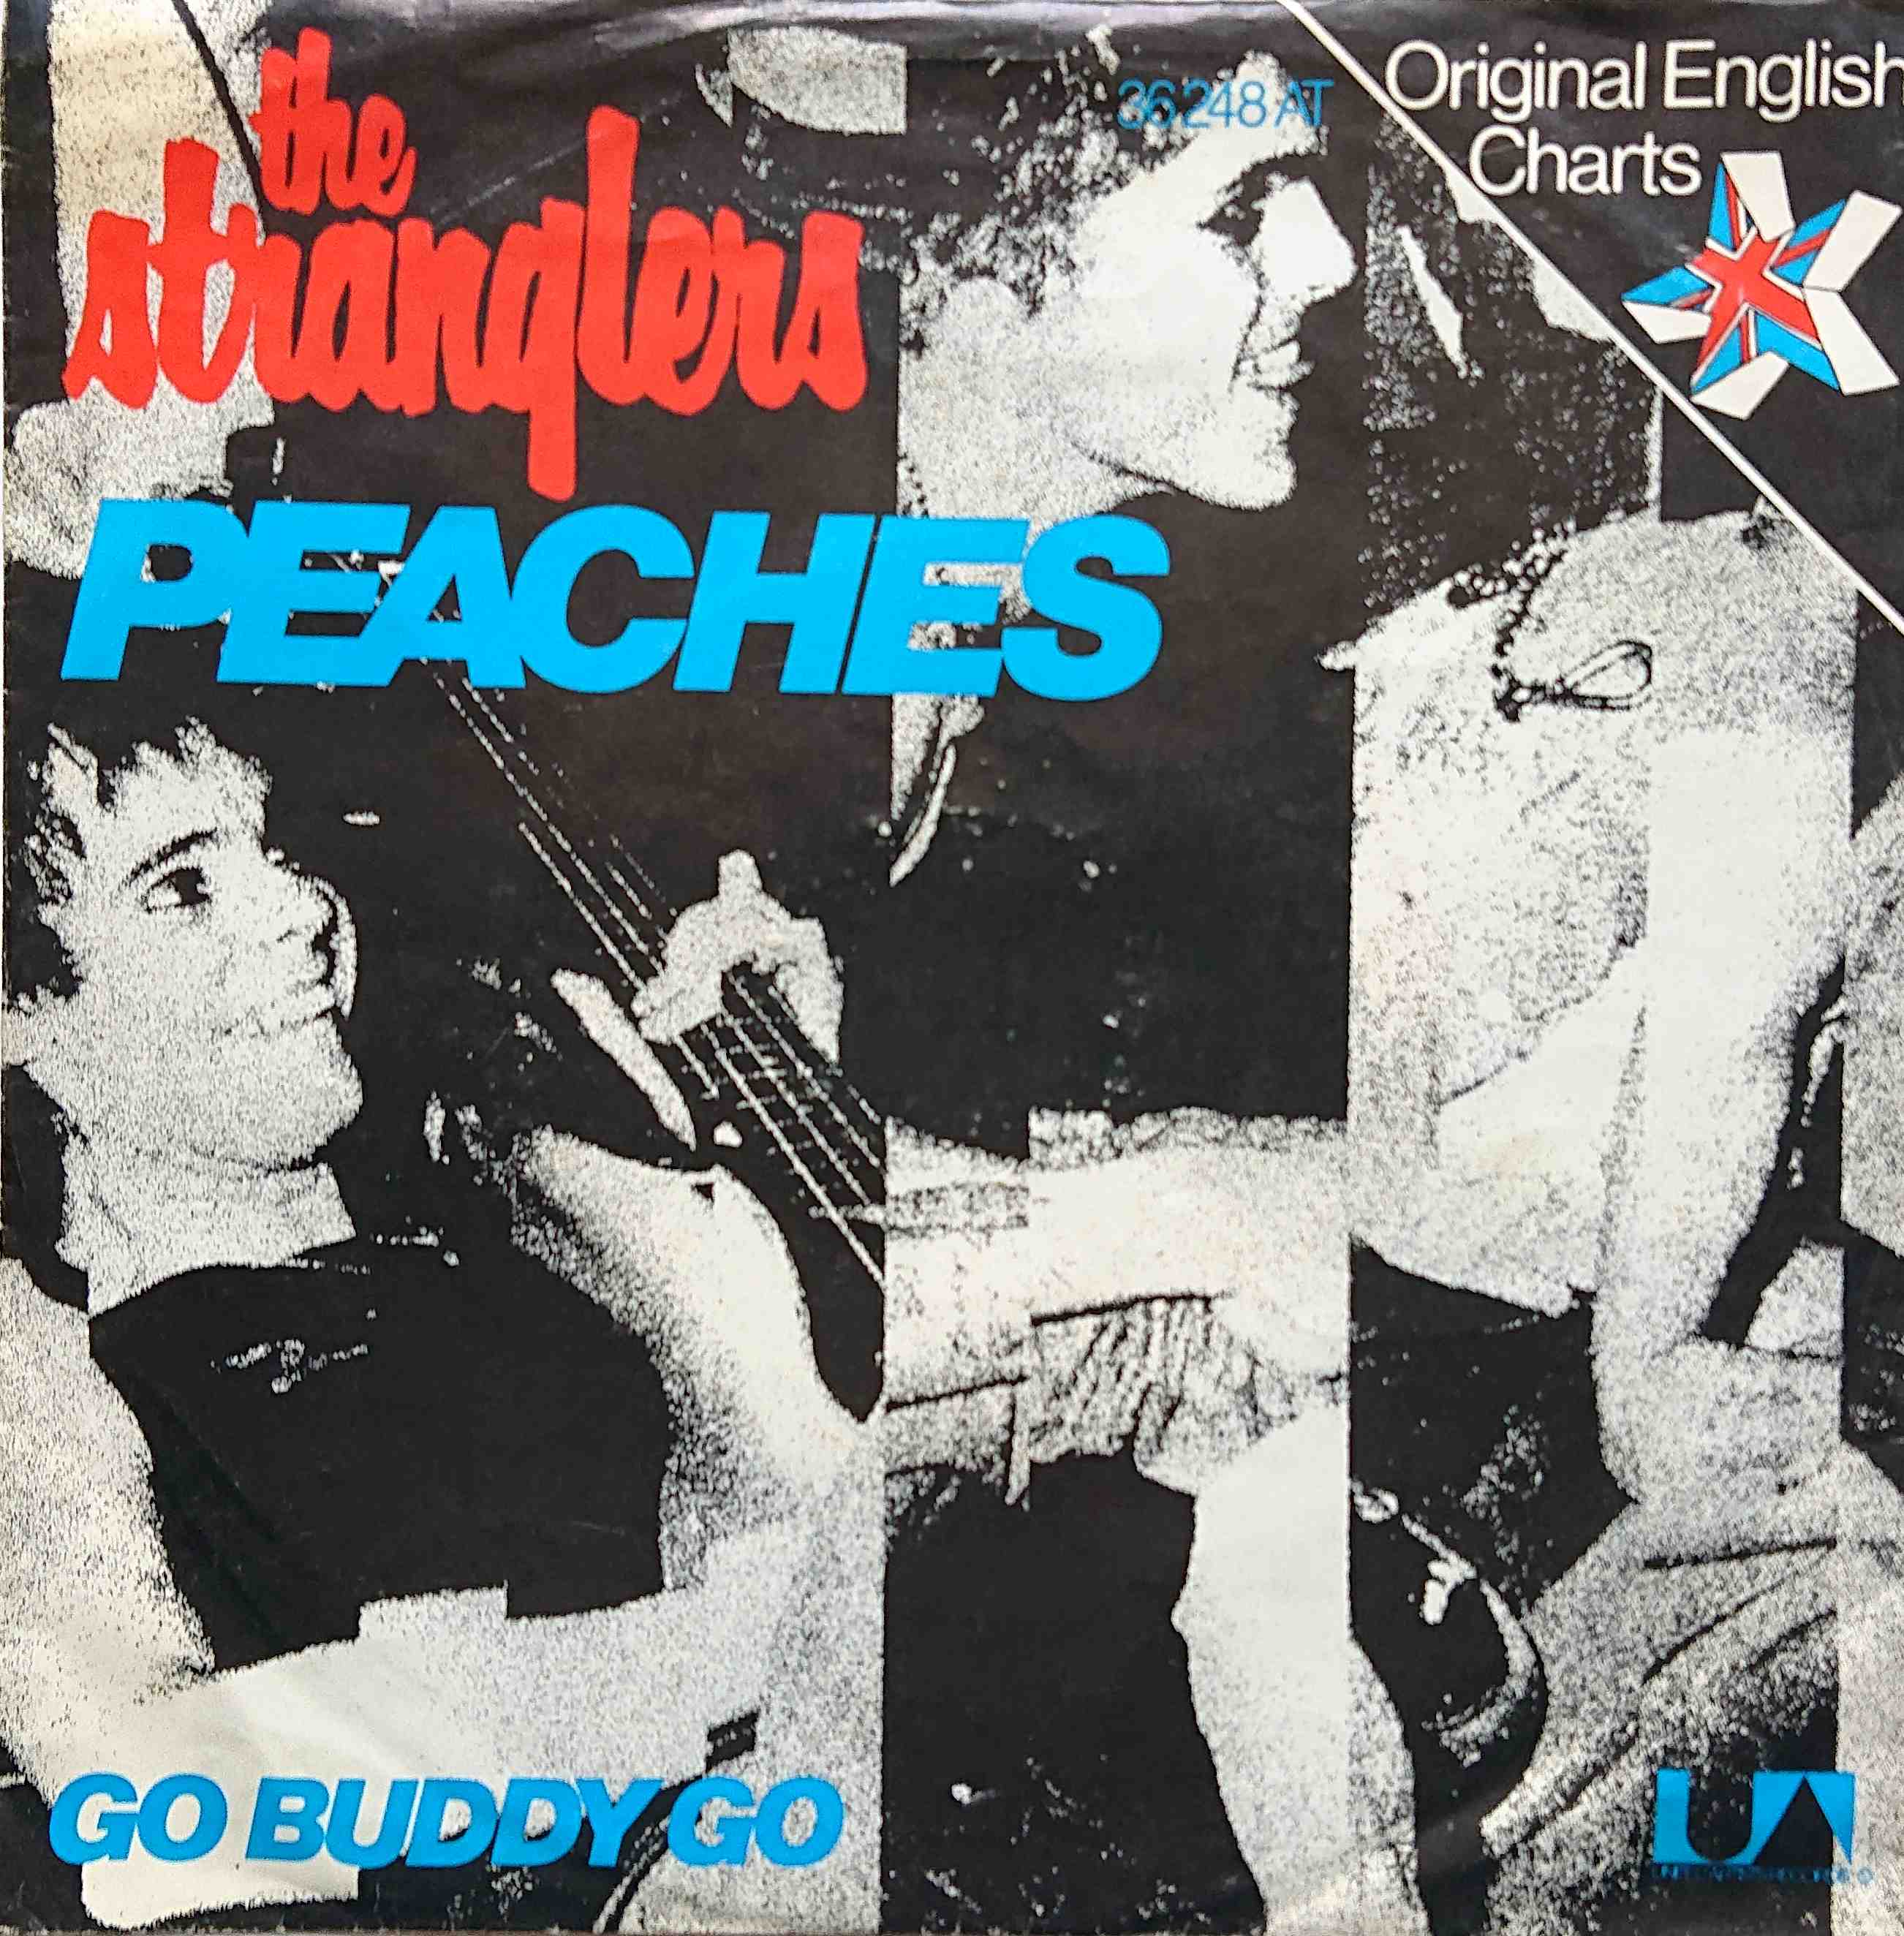 Picture of Peaches by artist The Stranglers  from The Stranglers singles